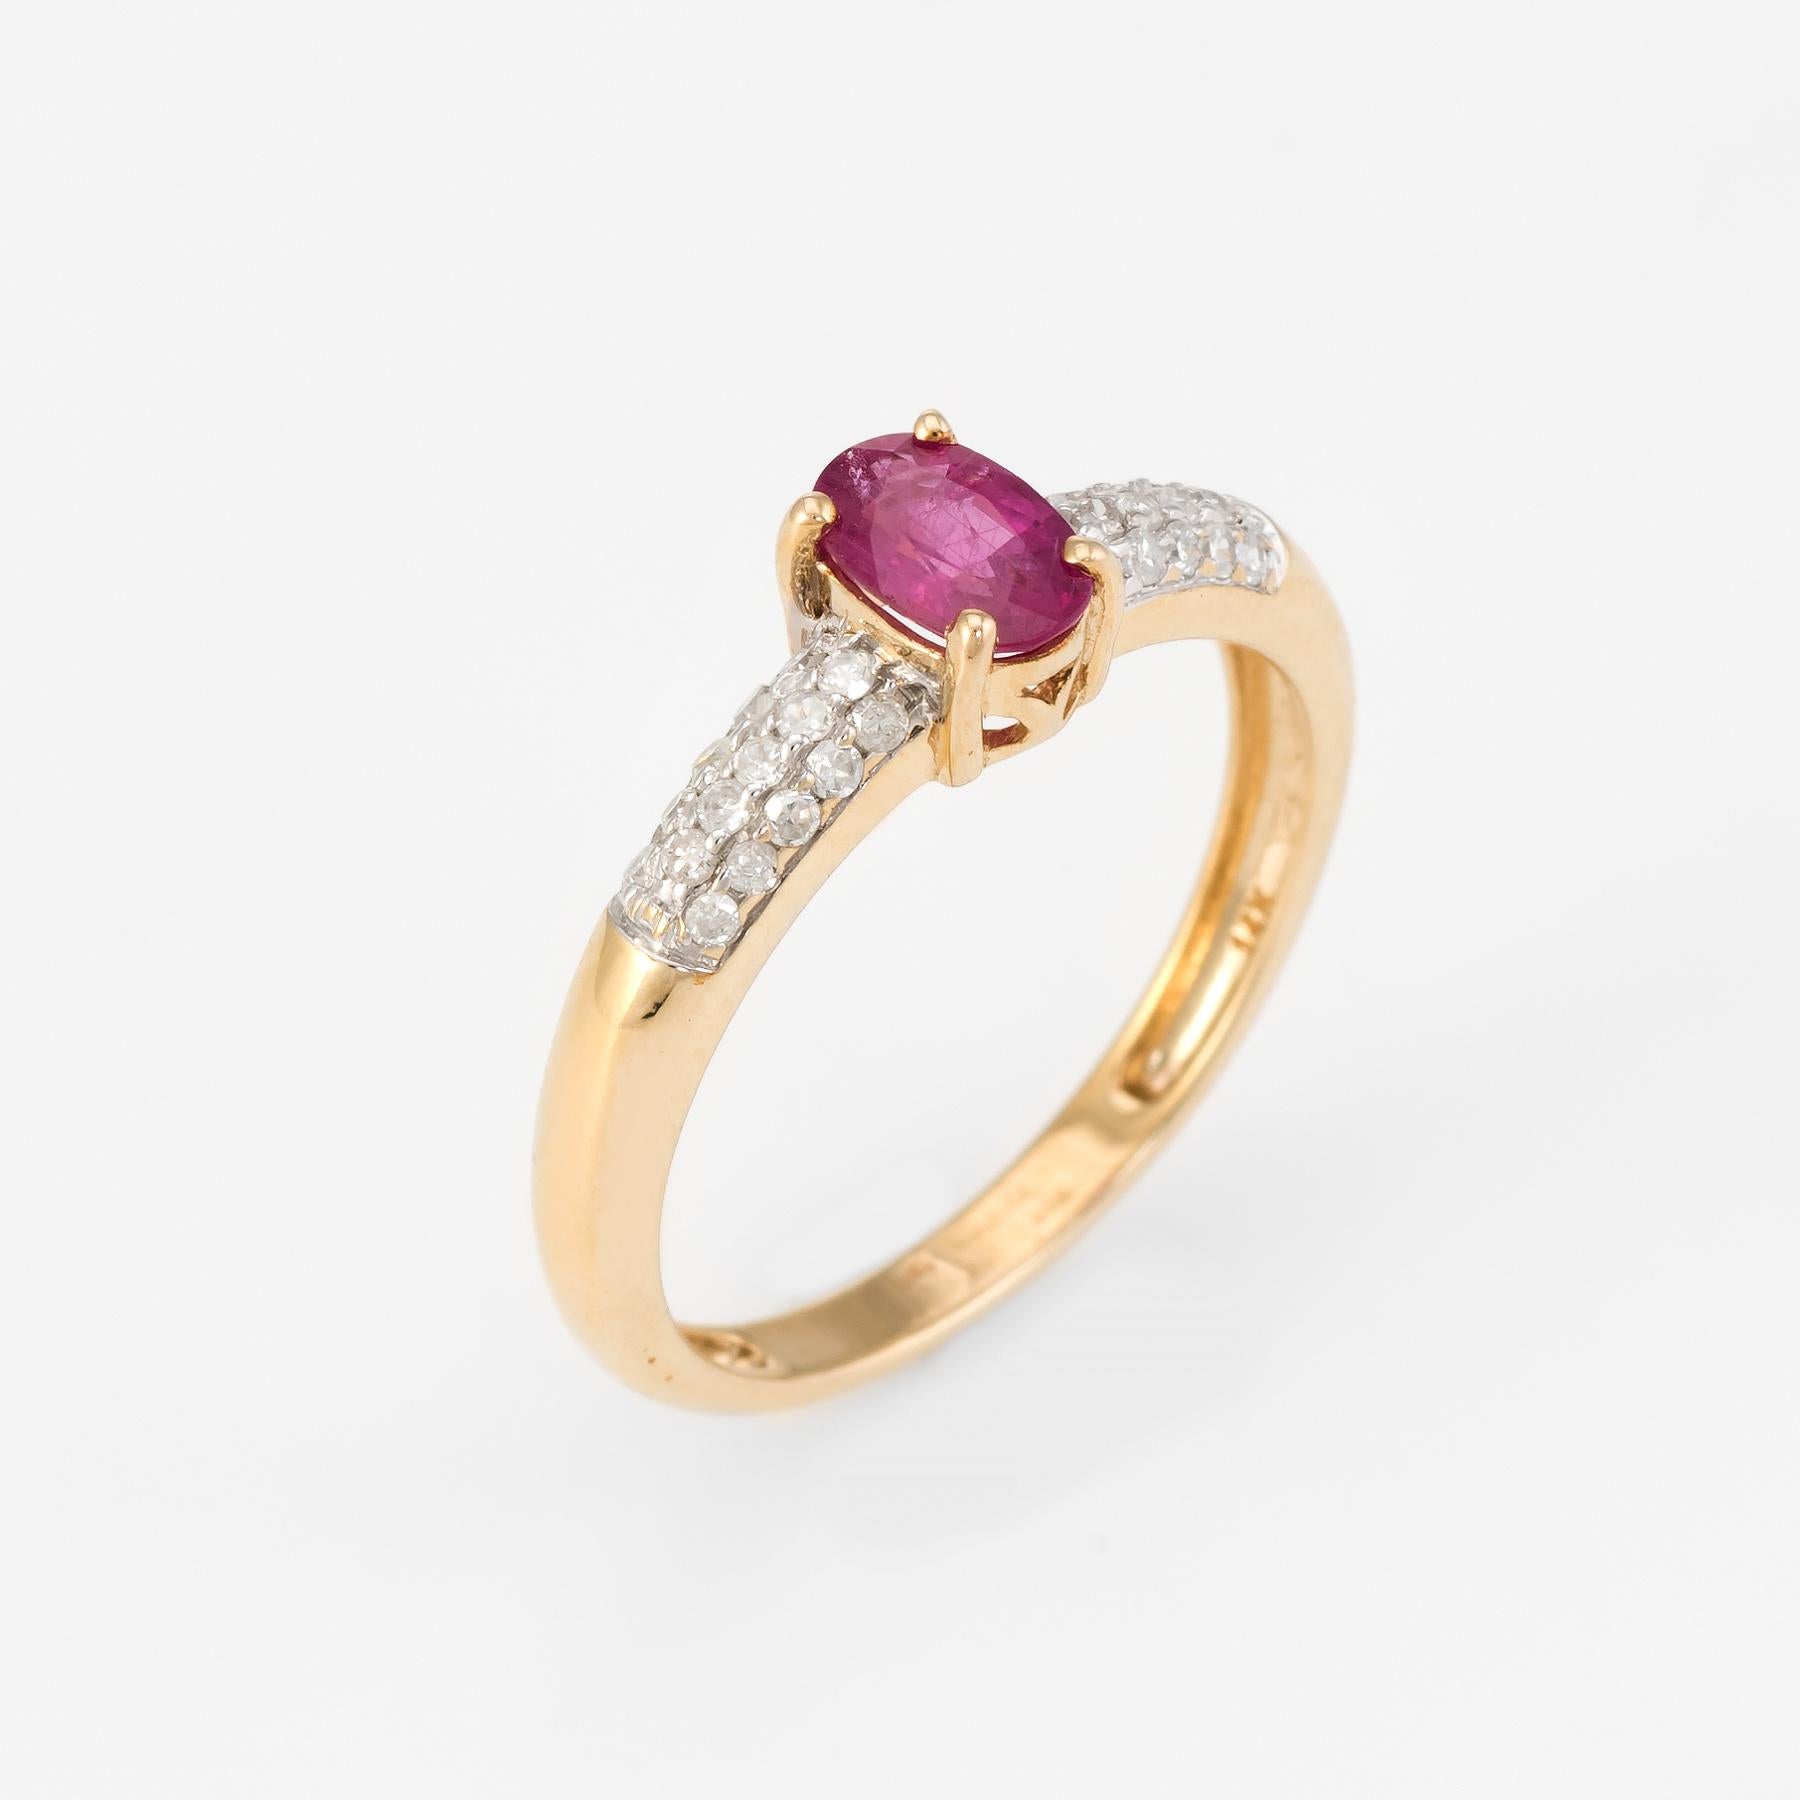 Elegant vintage stacking ring, crafted in 14 karat yellow gold. 

Faceted oval cut ruby measures 5.75mm x 4mm (estimated at 0.40 carats), accented with an estimated 0.15 carts of diamonds (estimated at H color and SI2-I1 clarity). The ruby is in